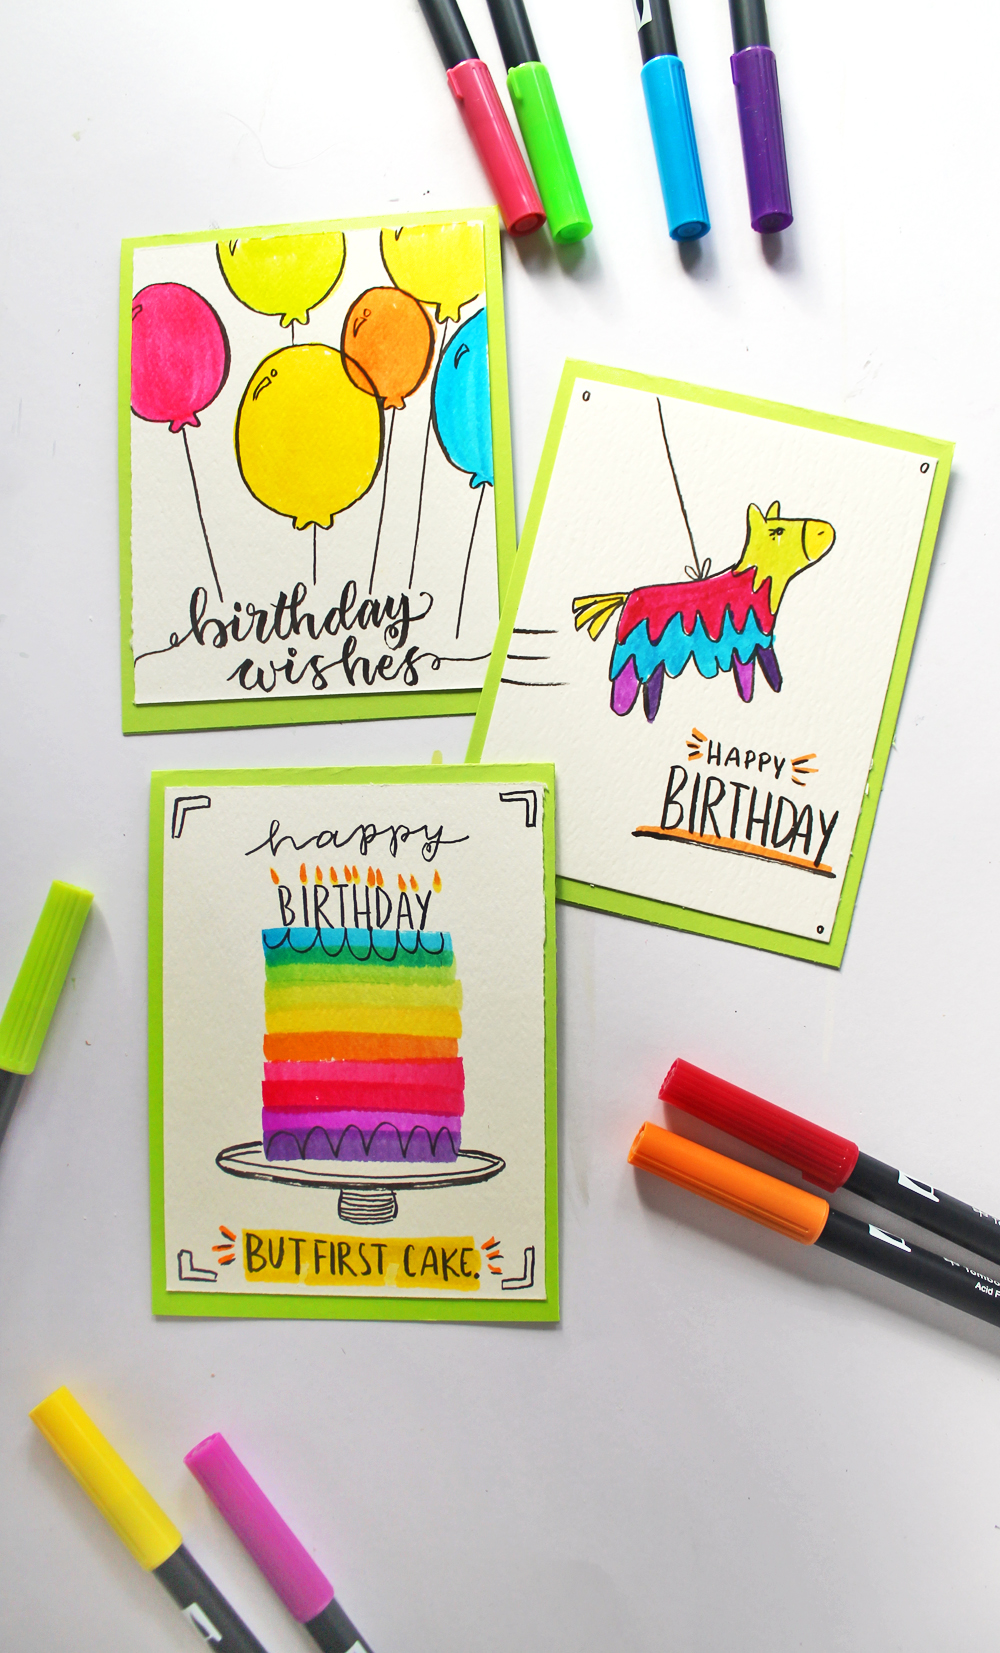 Easy Card Making Ideas: It's A Great Feeling To Make A Card in 5 Min.